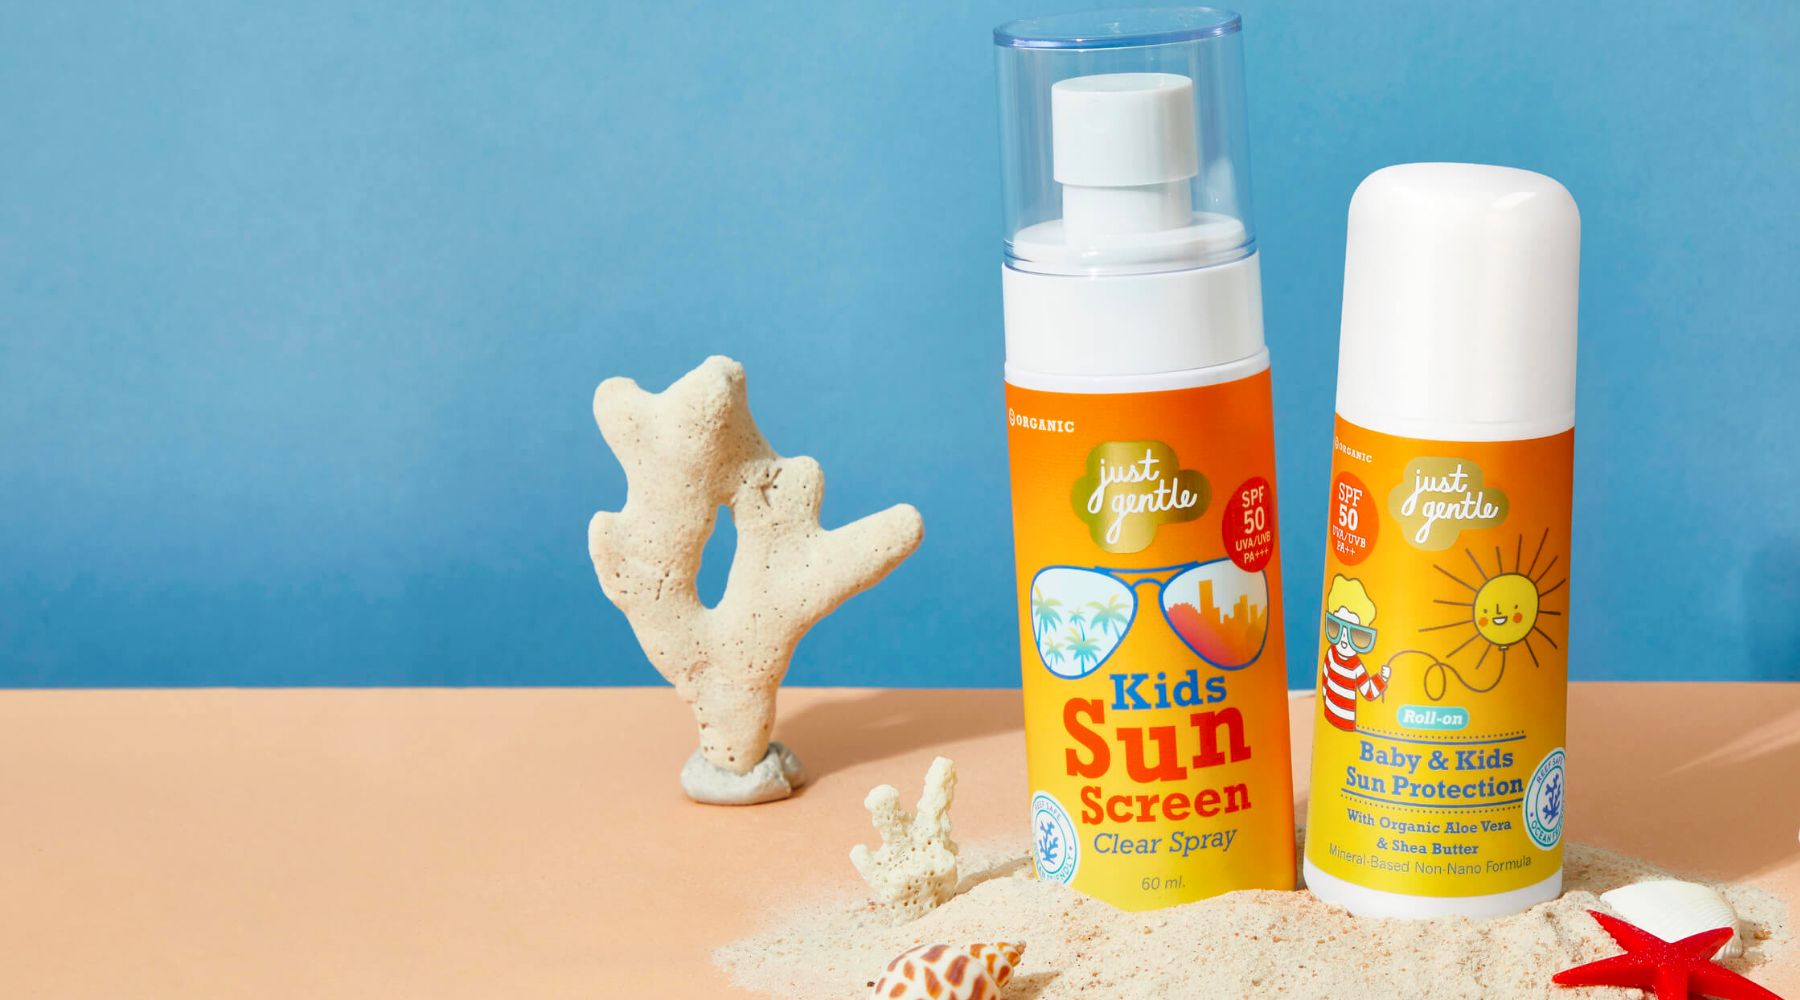 Just Gentle Sunscreens for Babies and Kids- Product Photoshoot for banners